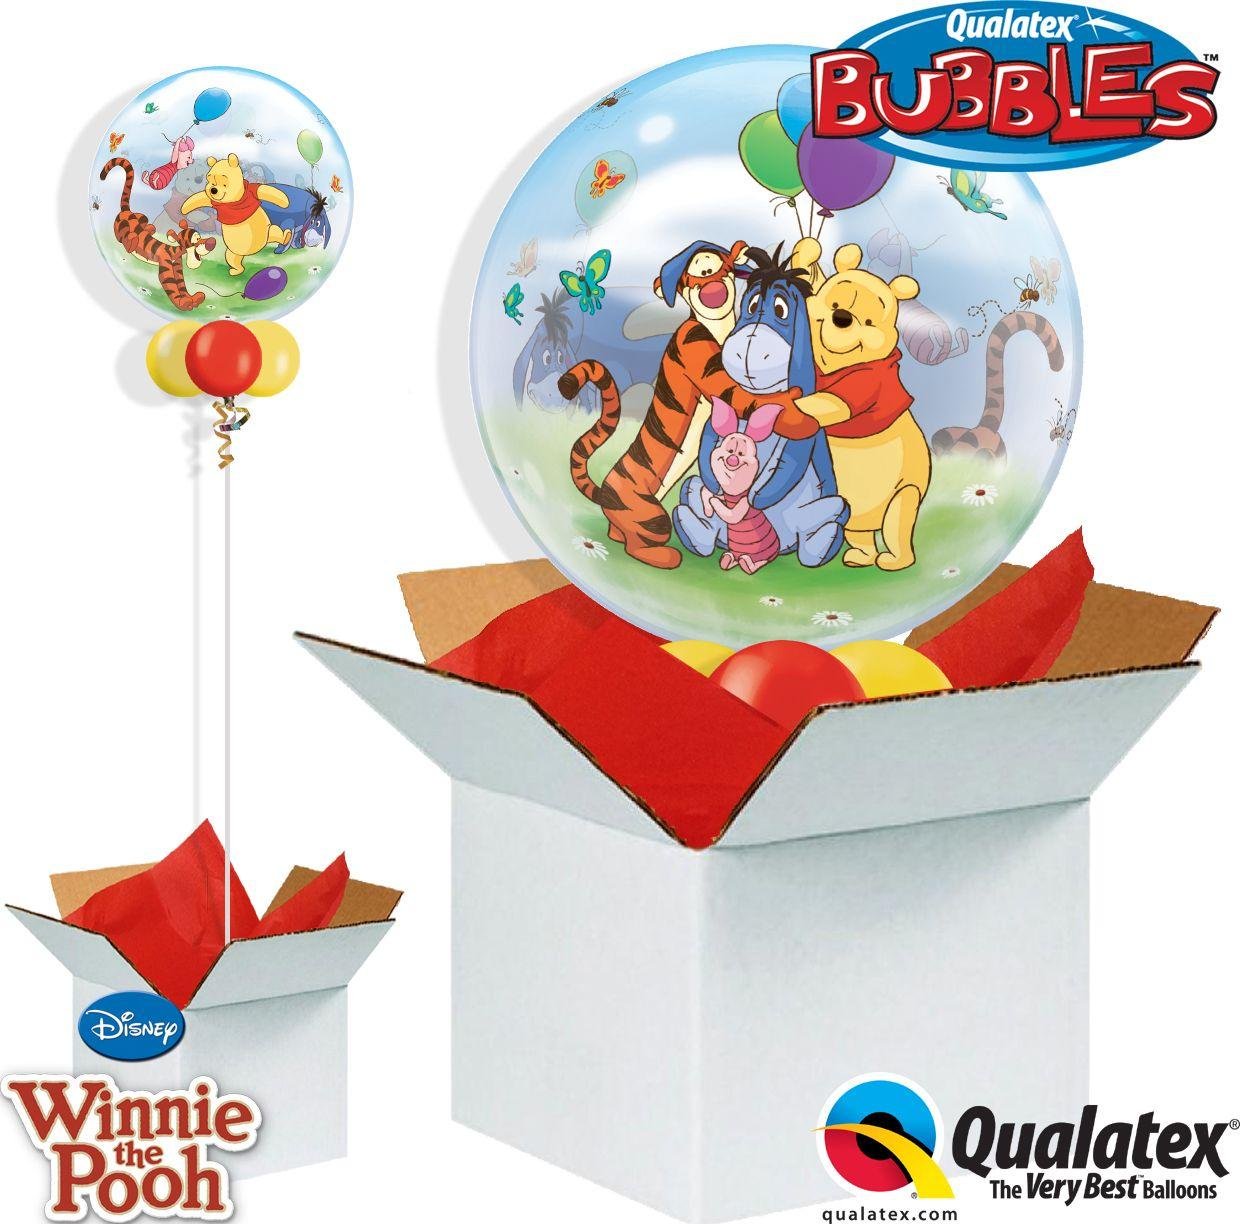 Disney Winnie the Pooh and Friends Bubble Balloon in a Box